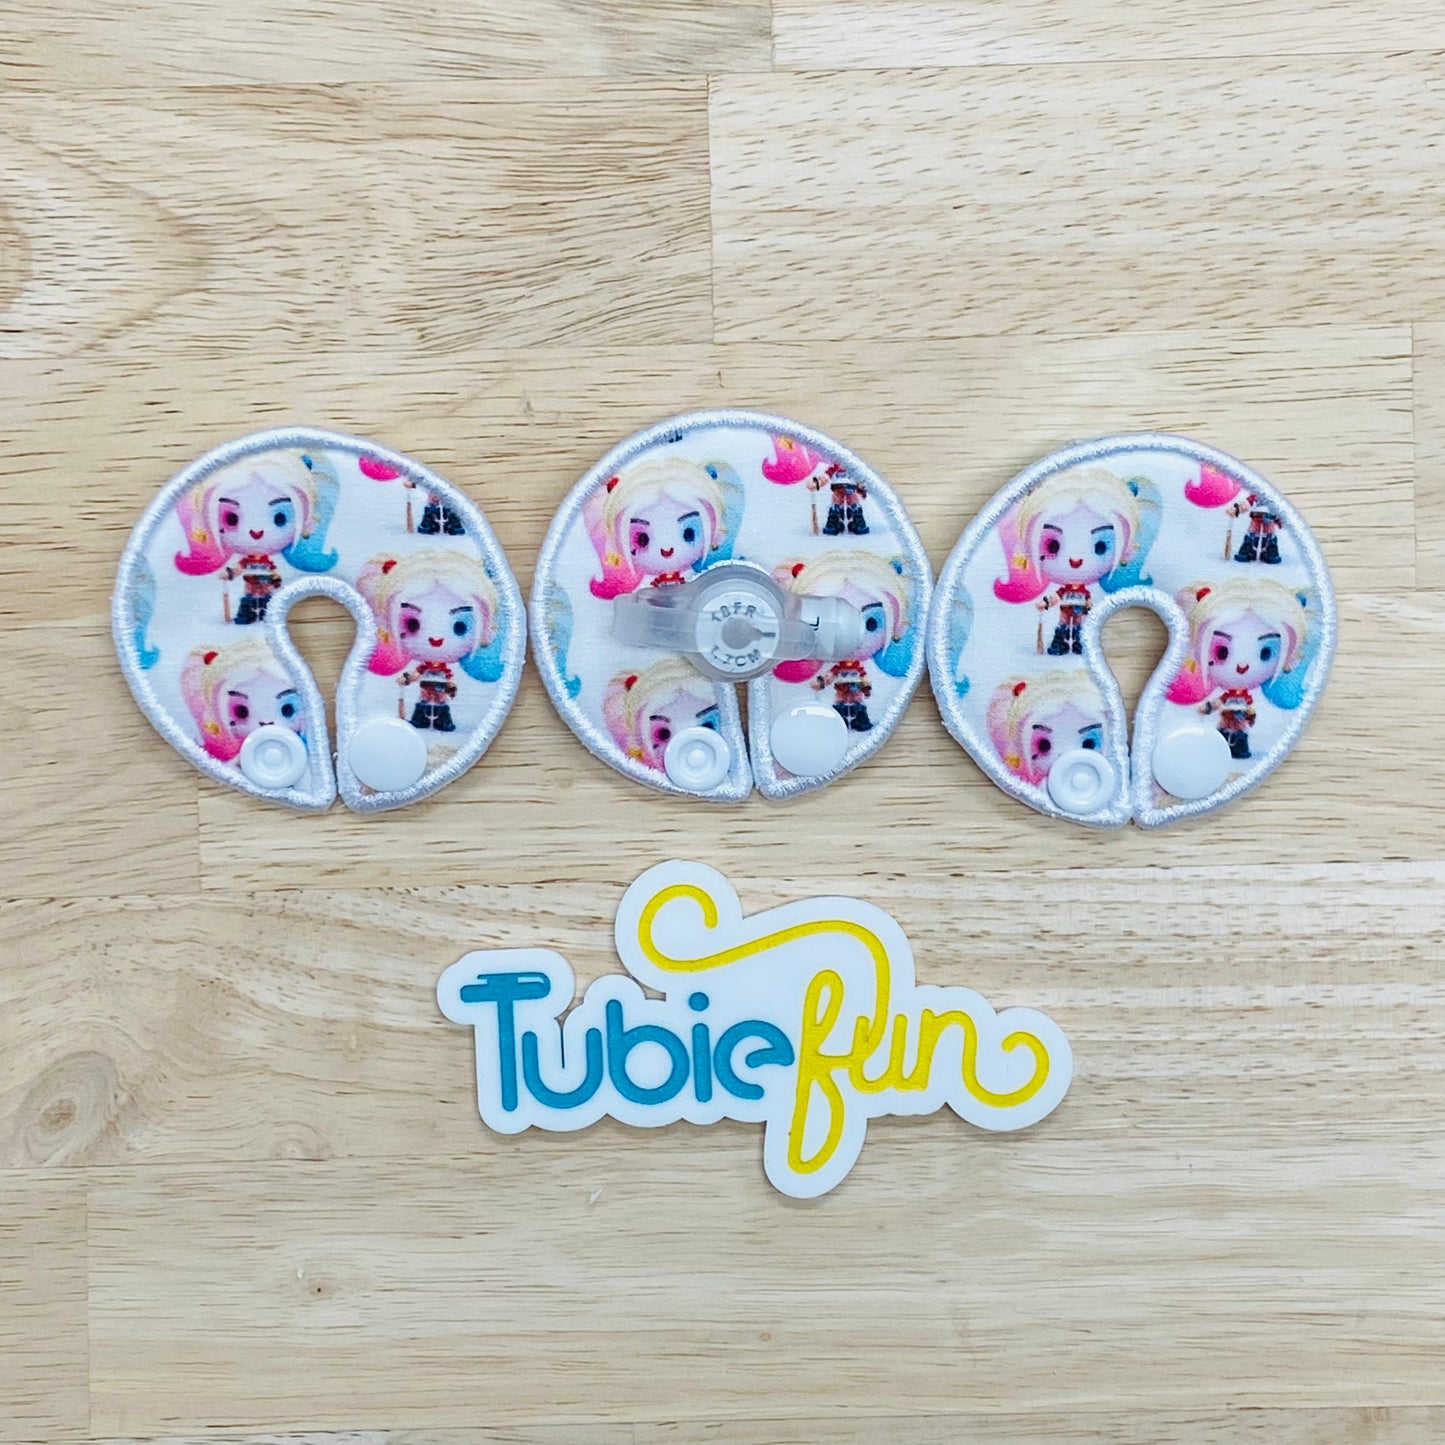 G-Tube Button Pad Cover - Pink and Blue Haired Girl